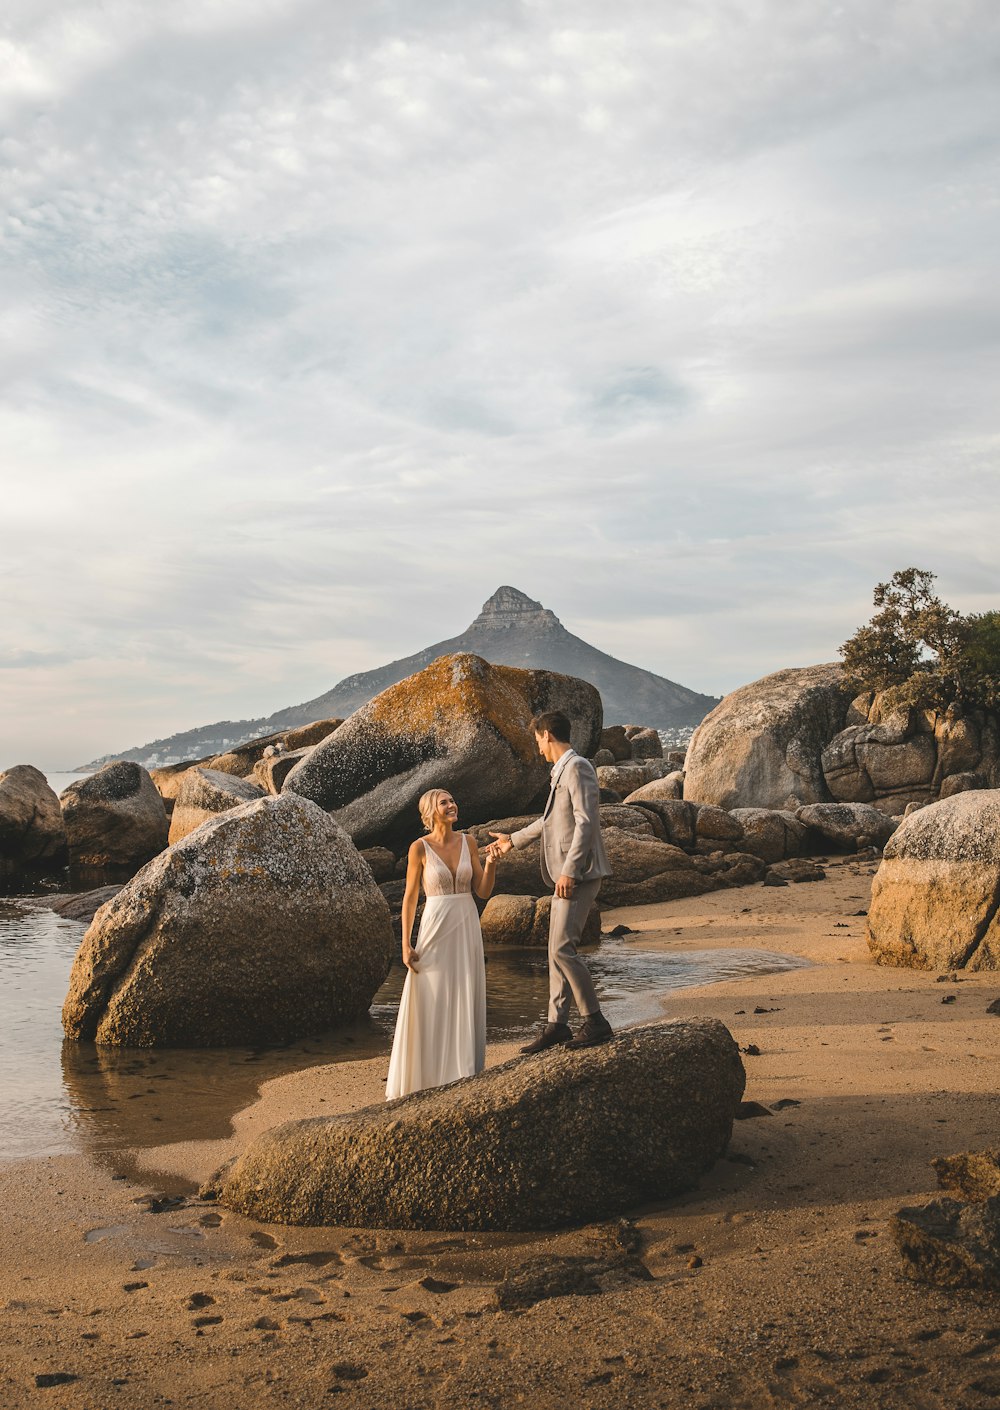 woman in white dress standing on brown rock near body of water during daytime